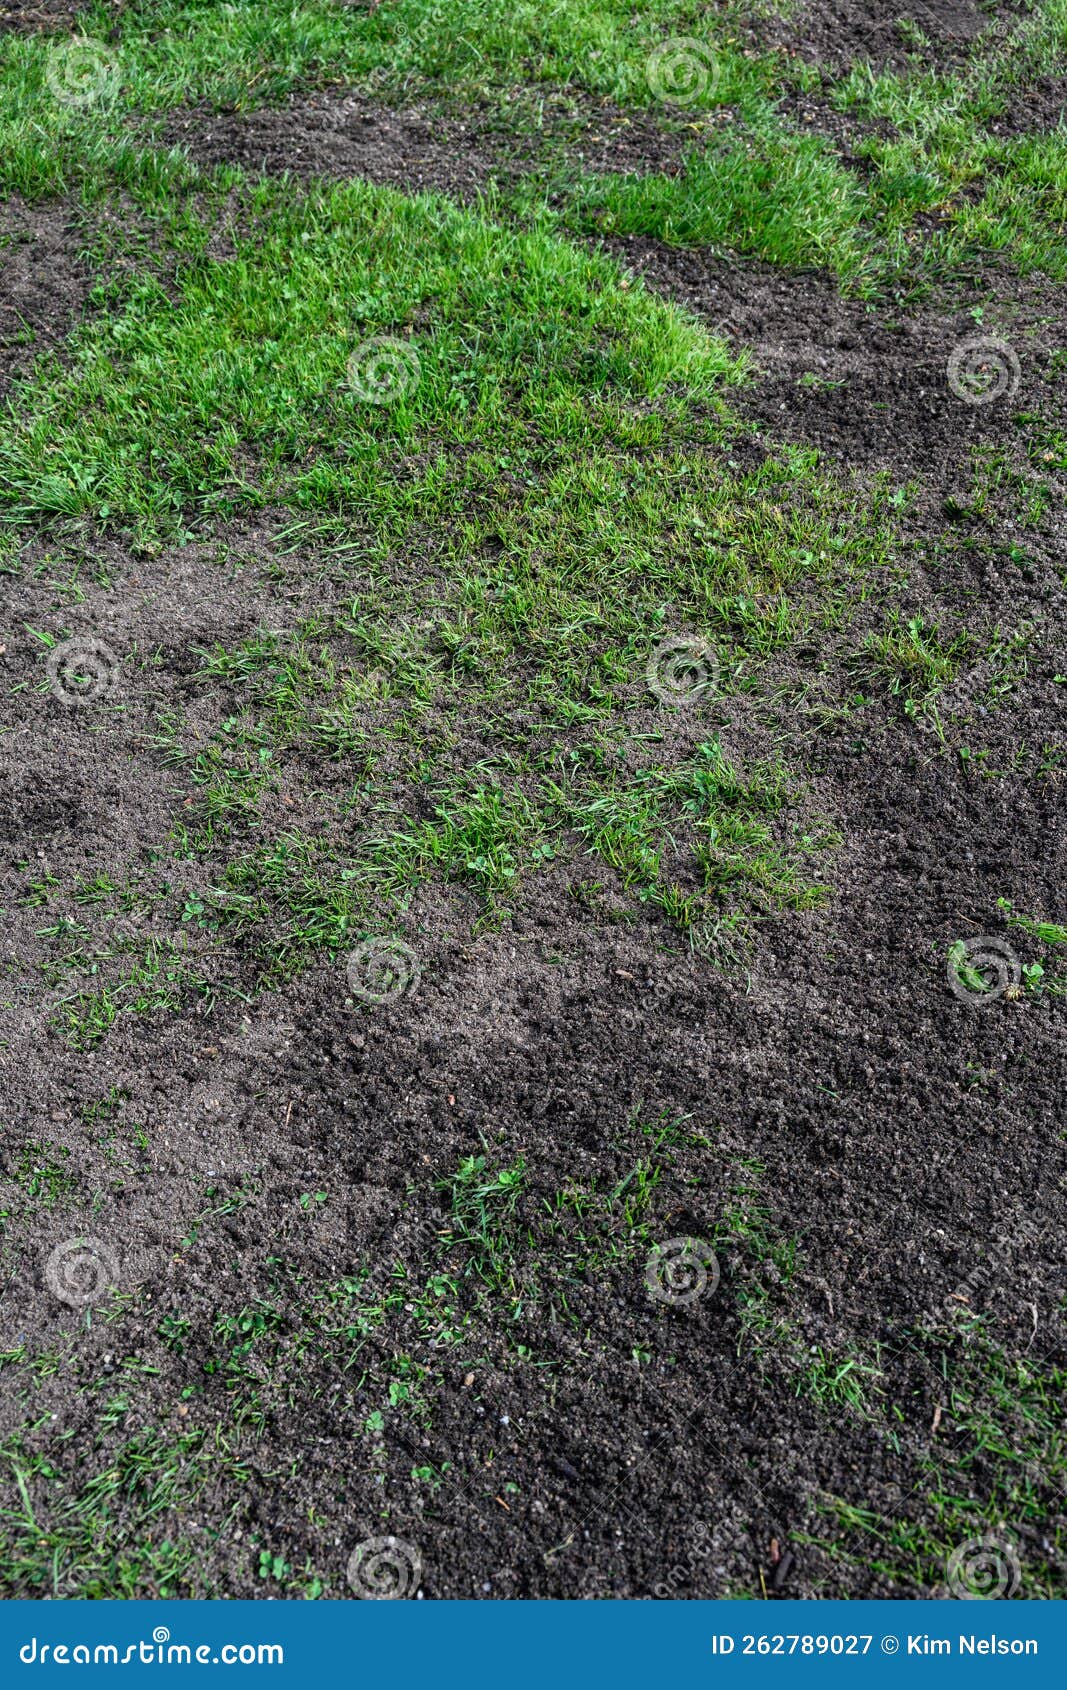 major lawn repair and reseeding project, fresh seeds and rich topsoil in a green lawn